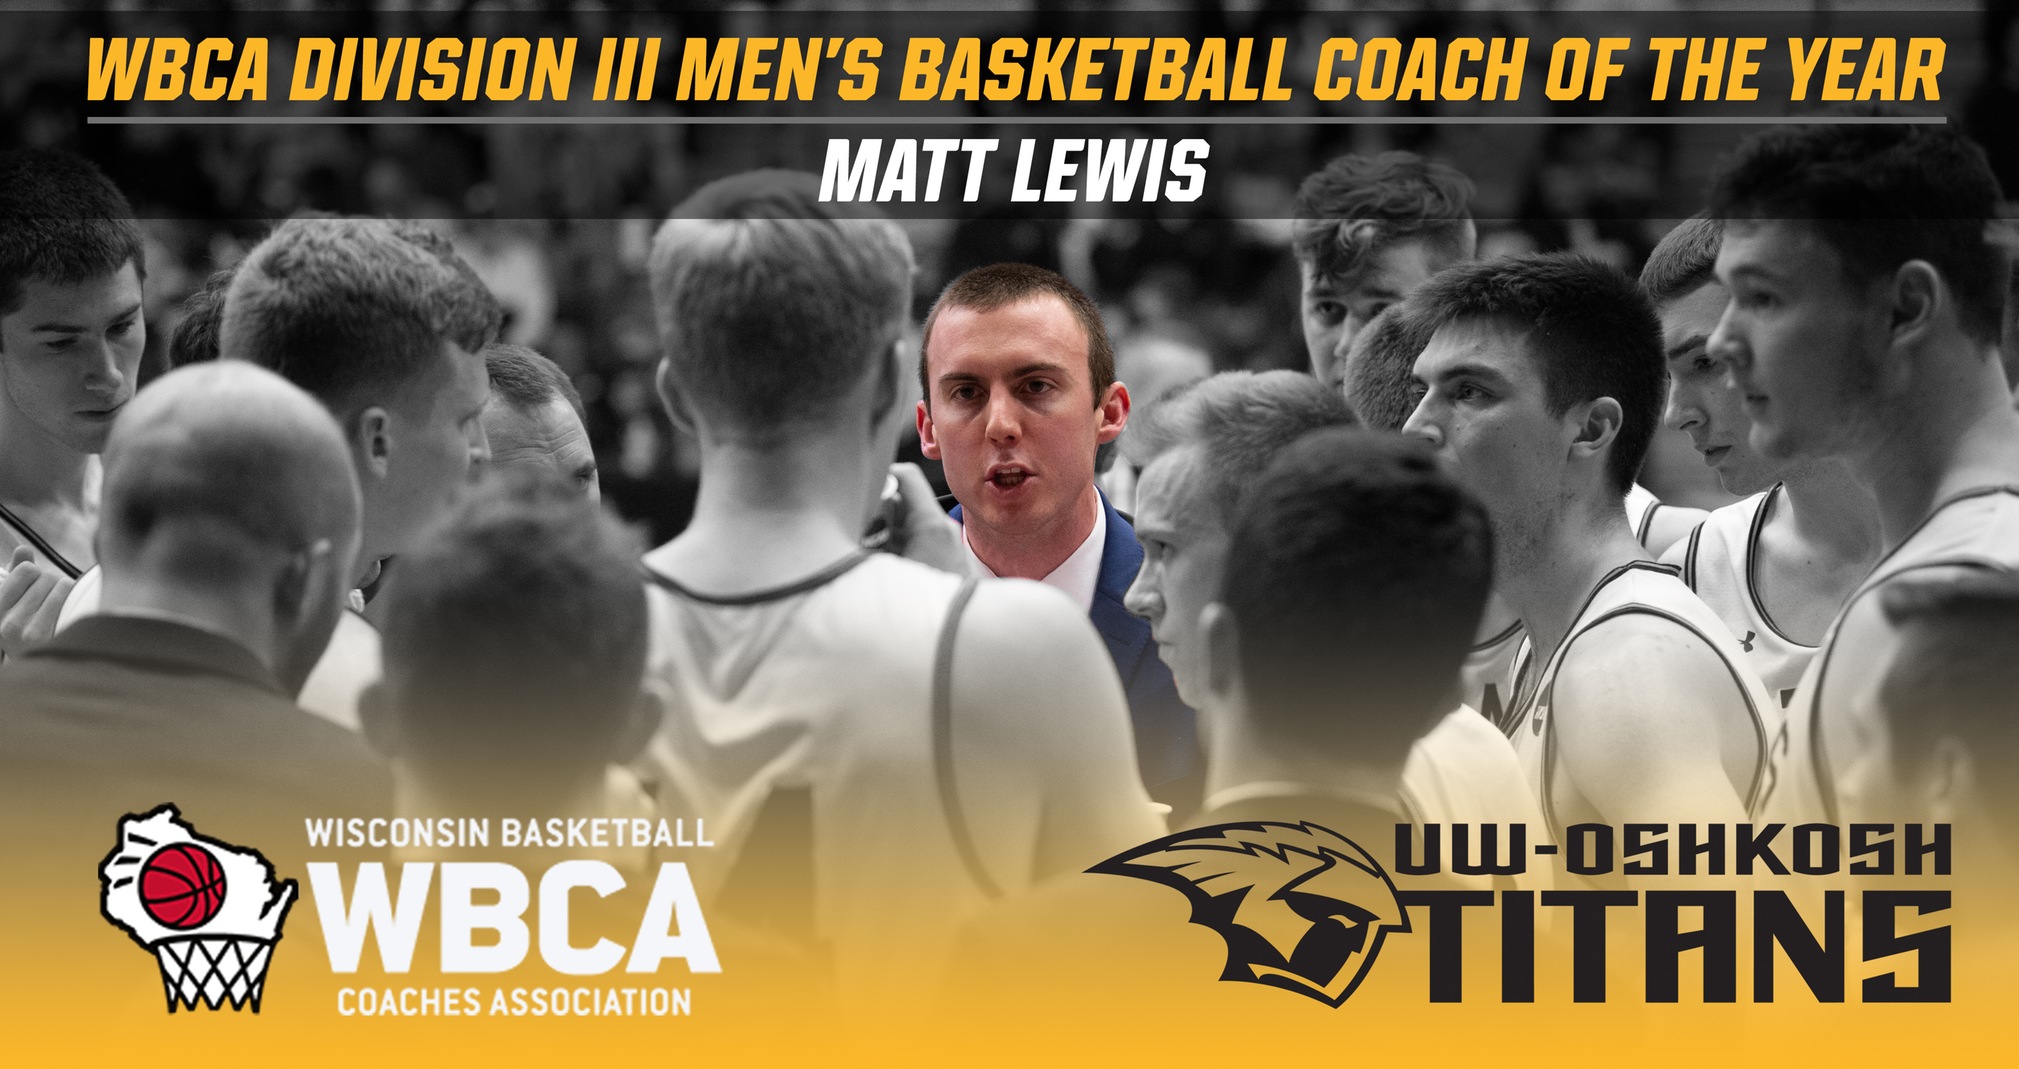 Lewis Named WBCA Division III Coach Of The Year